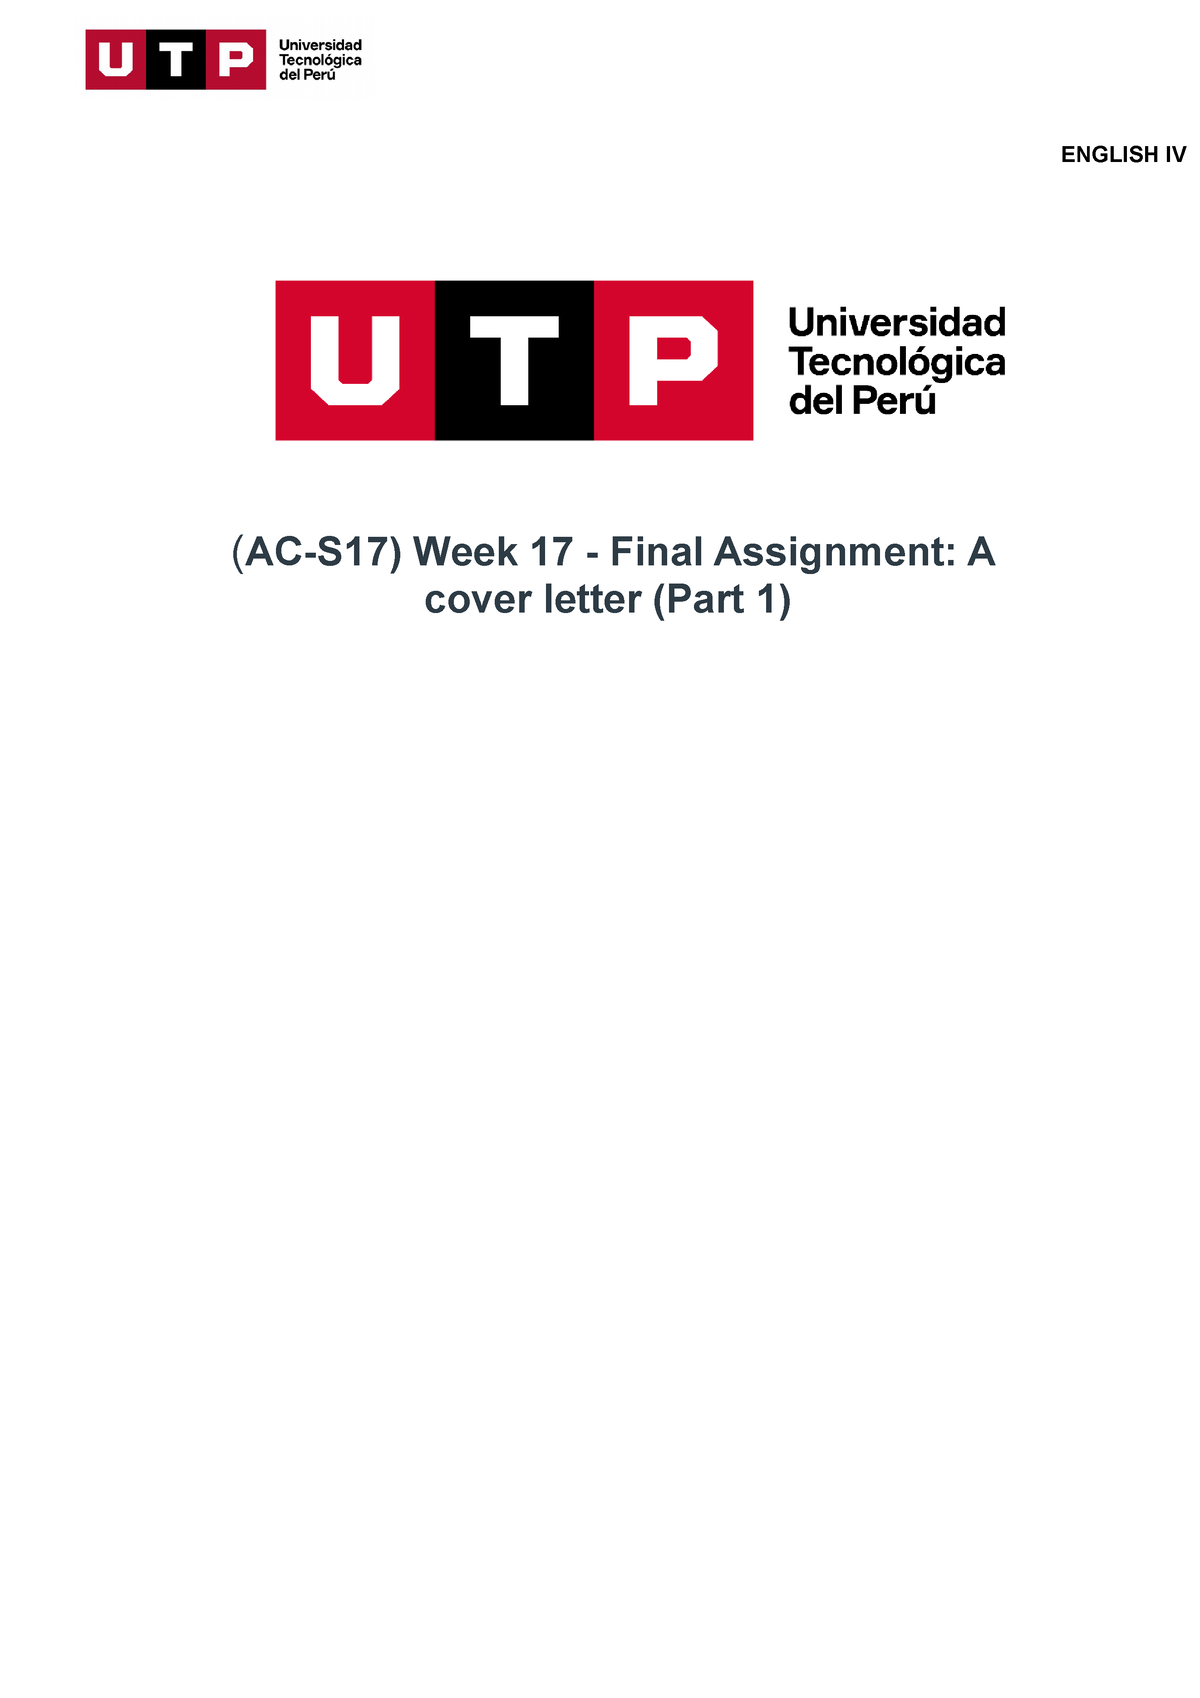 week 17 final assignment a cover letter (part 1)